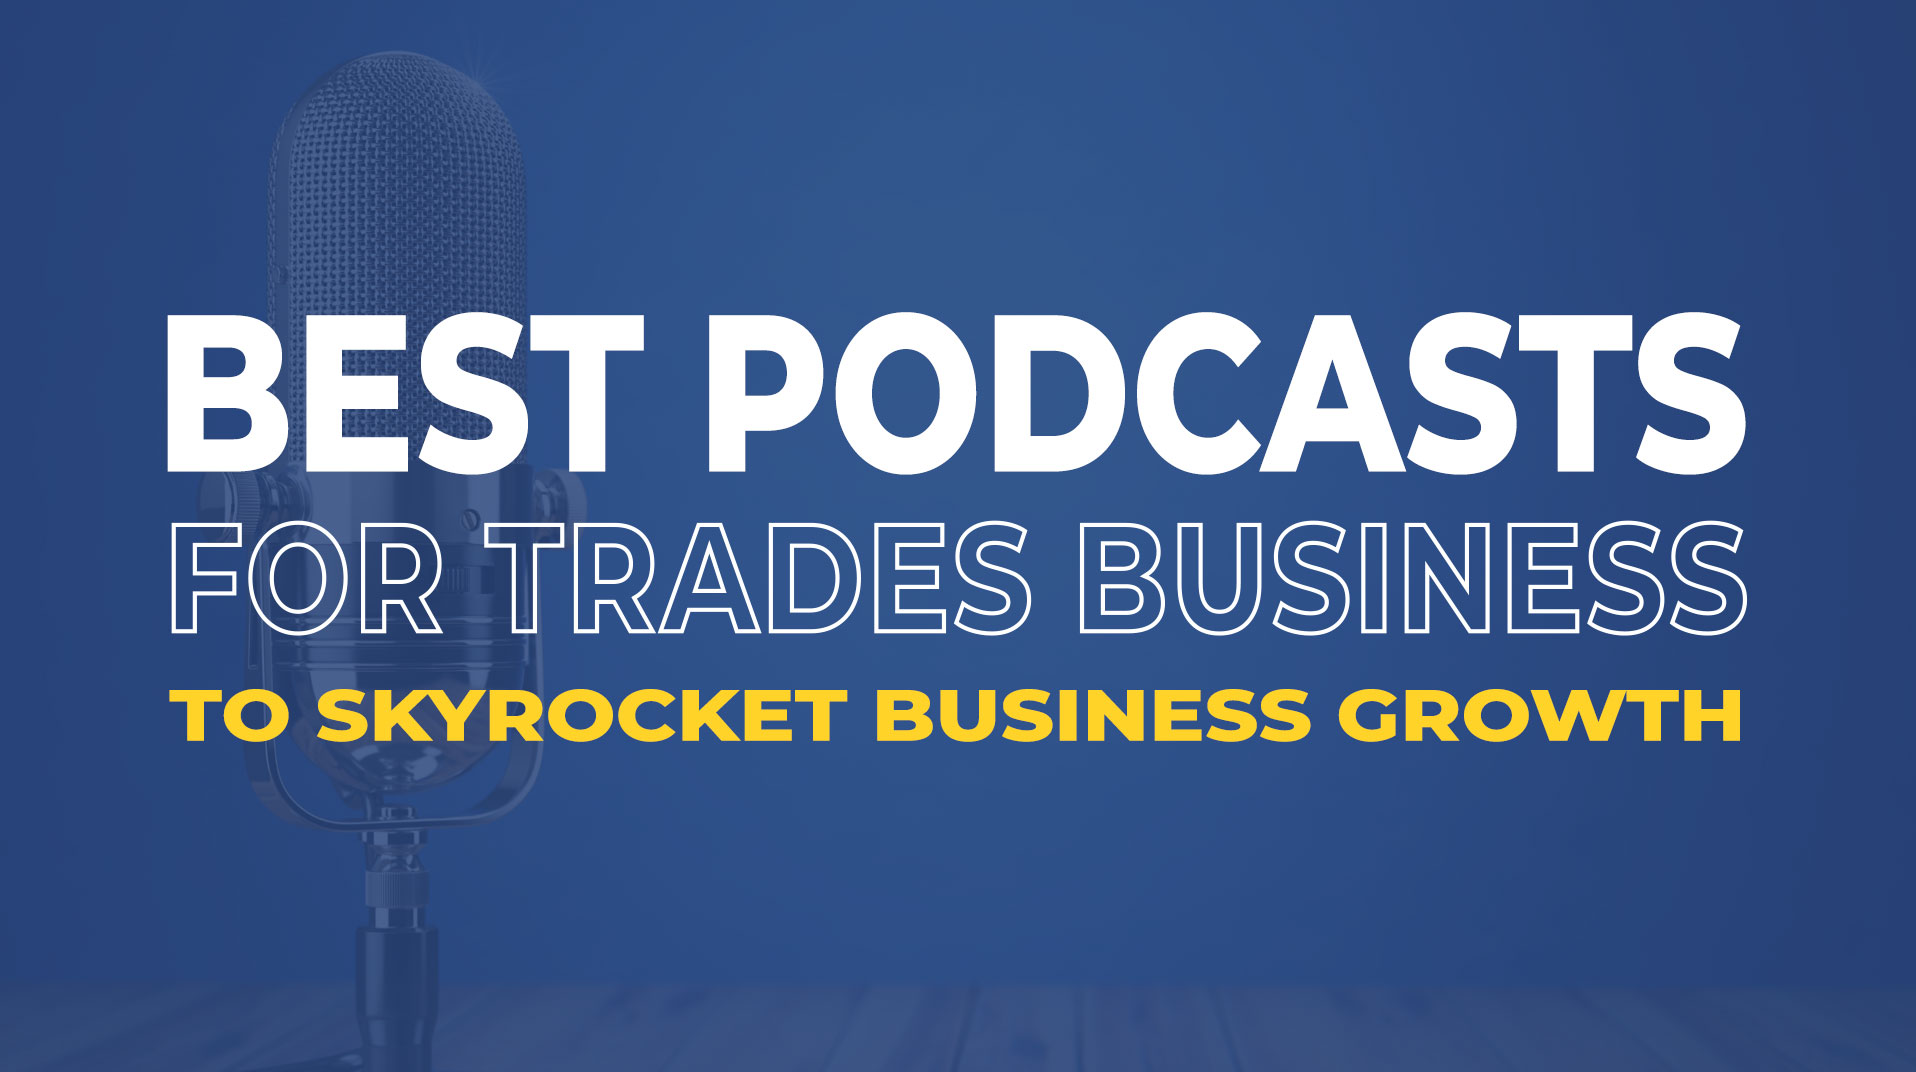 11 Best Podcasts for Tradespeople to Skyrocket Business Growth